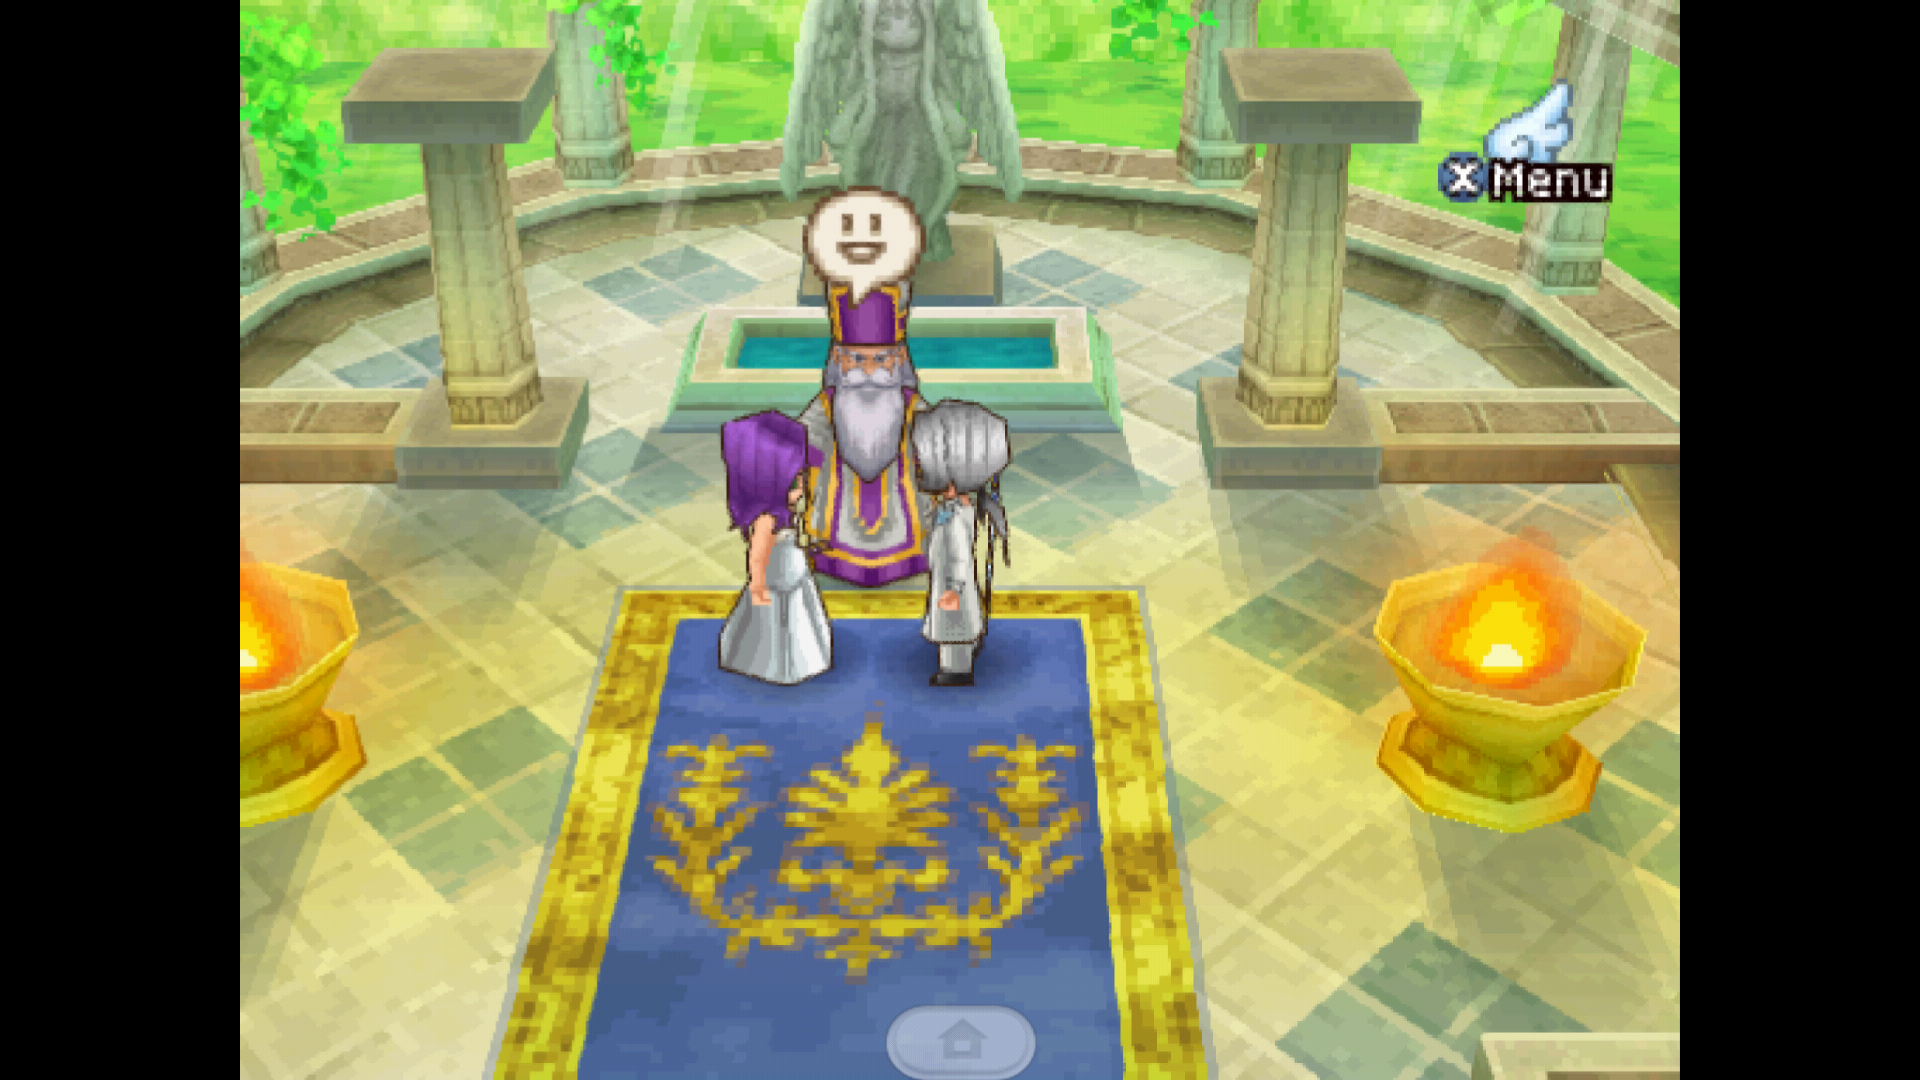 Dragon Quest IX - Sentinels of the Starry Skies for nds screenshot